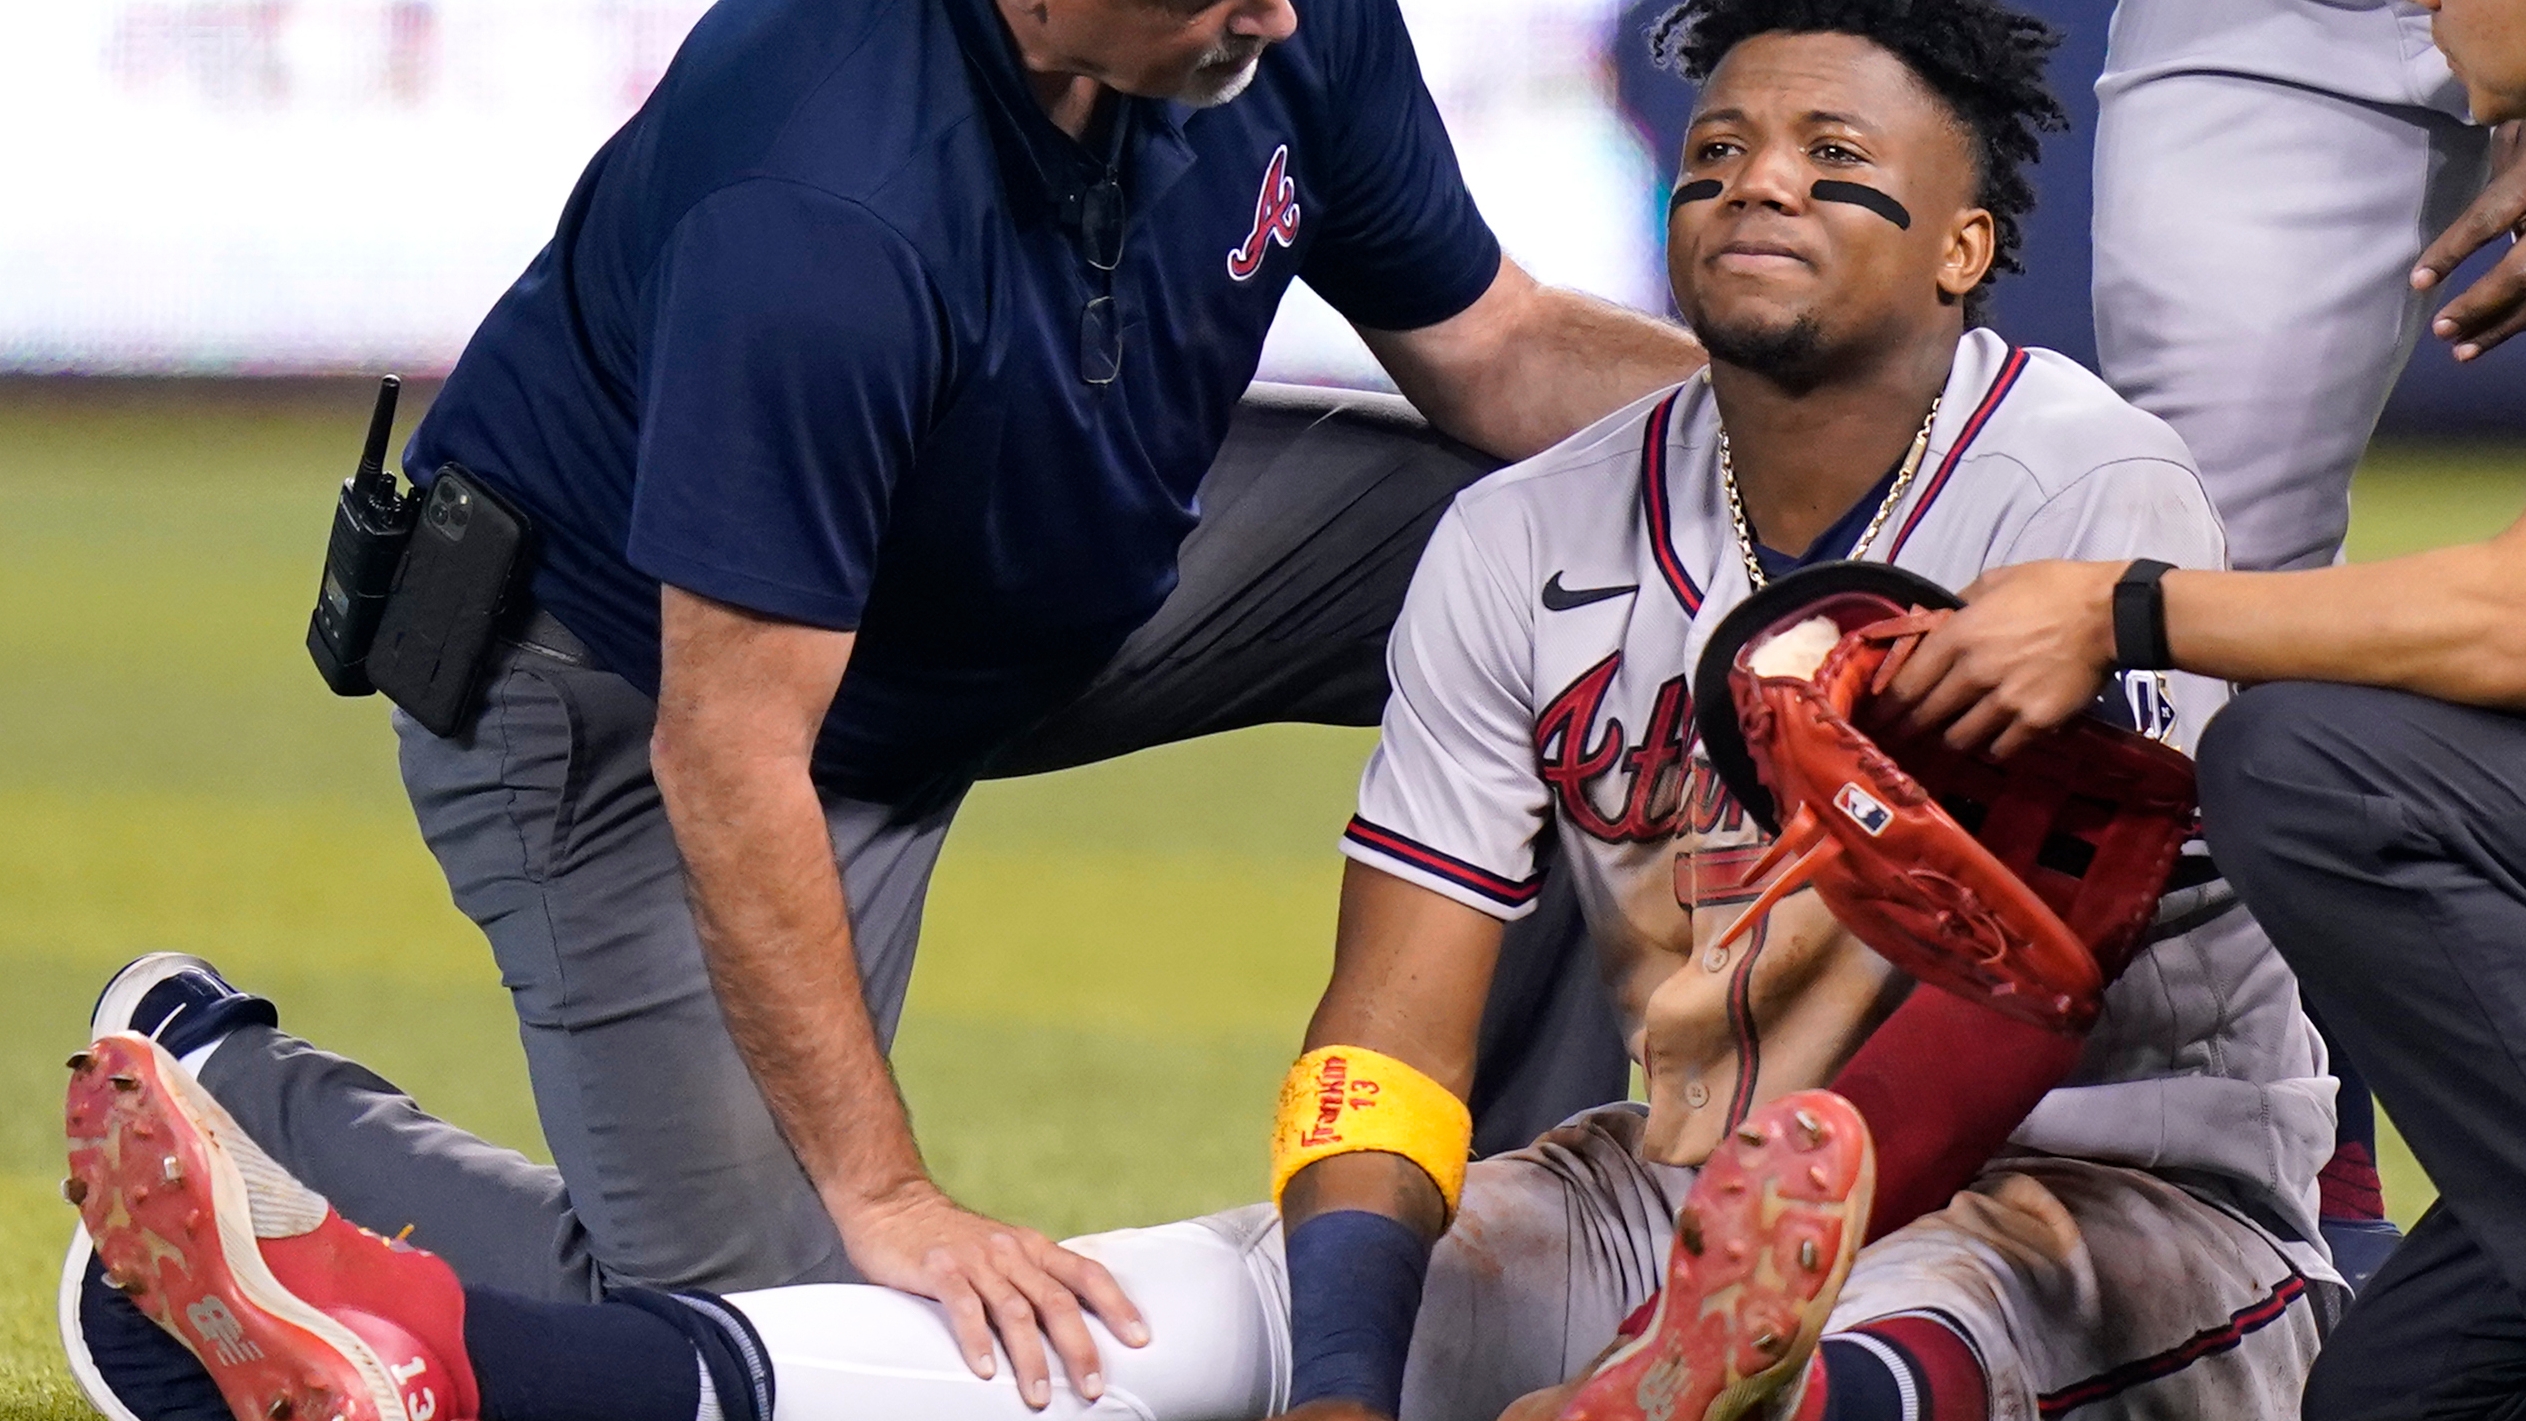 Braves' Ronald Acuña Jr. out for season with torn ACL - MLB Daily Dish